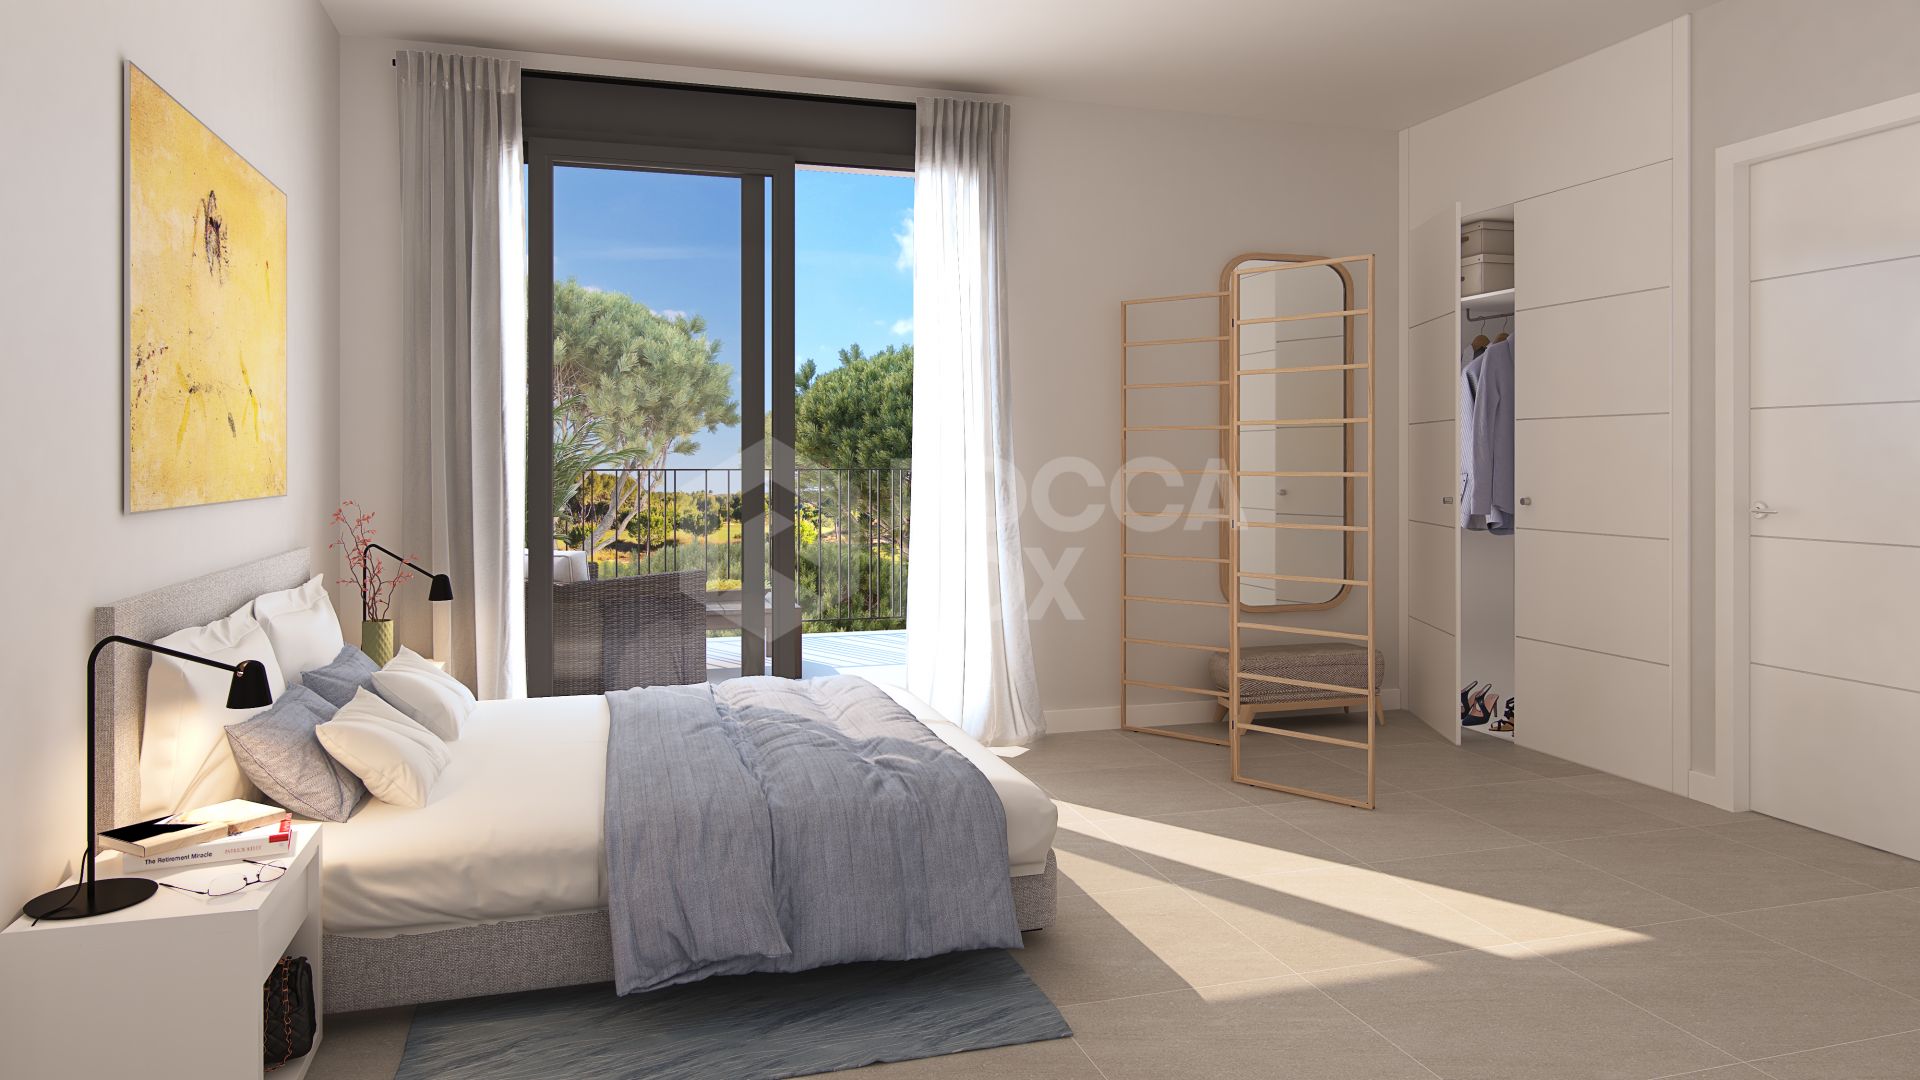 Adel San Roque, spacious townhouses next to the golf course in San Roque